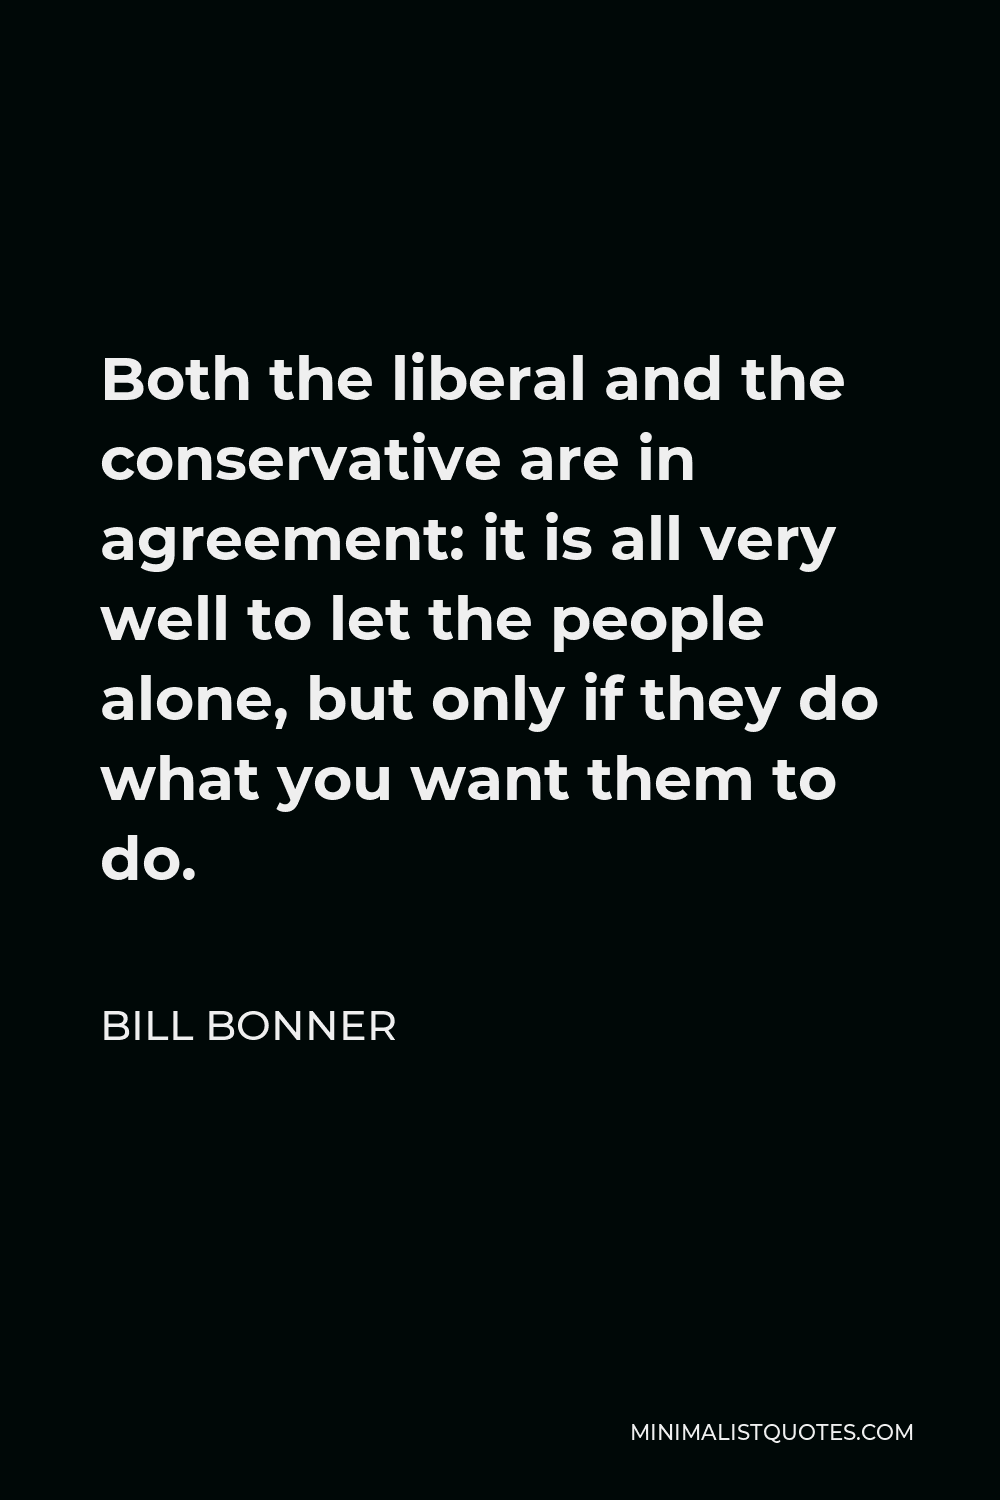 Bill Bonner Quote - Both the liberal and the conservative are in agreement: it is all very well to let the people alone, but only if they do what you want them to do.